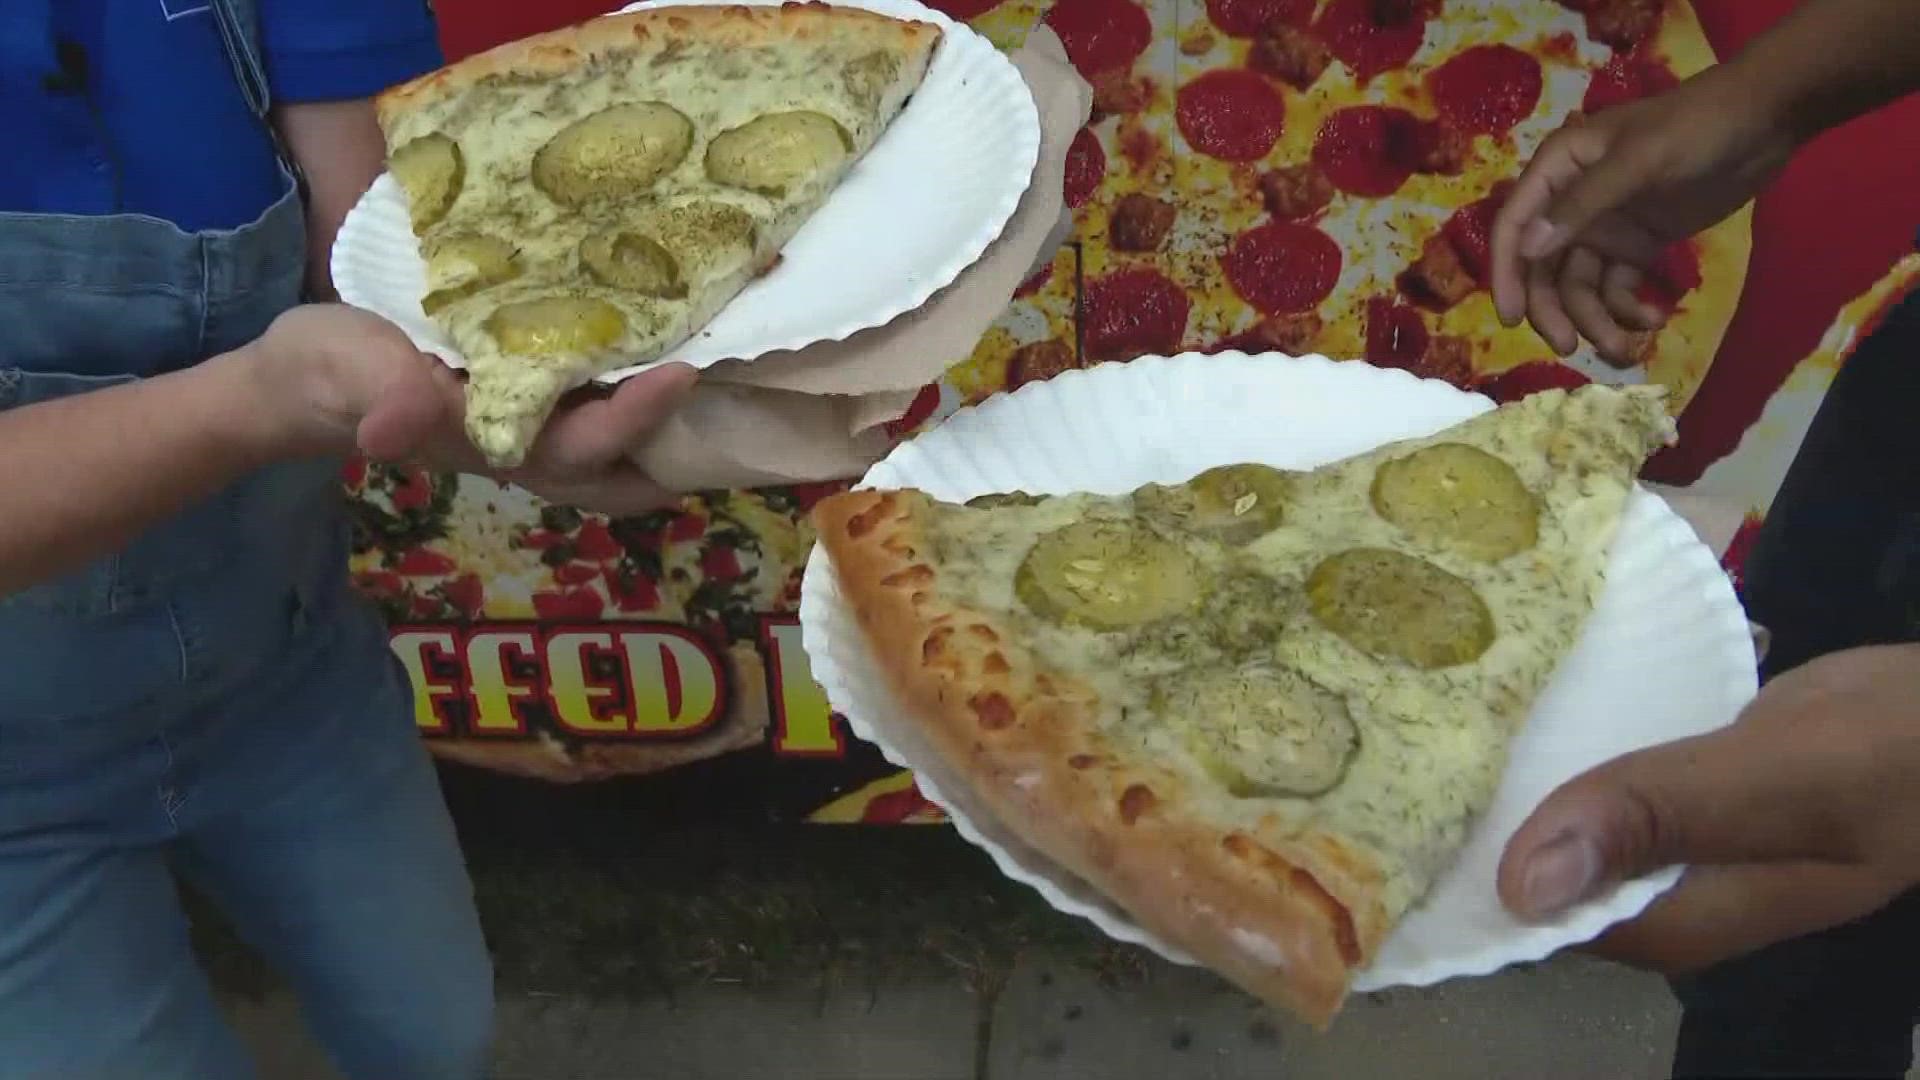 Don't let Carlos and Lindsey fool you - the pickle pizza is a delight at the Indiana State Fair.